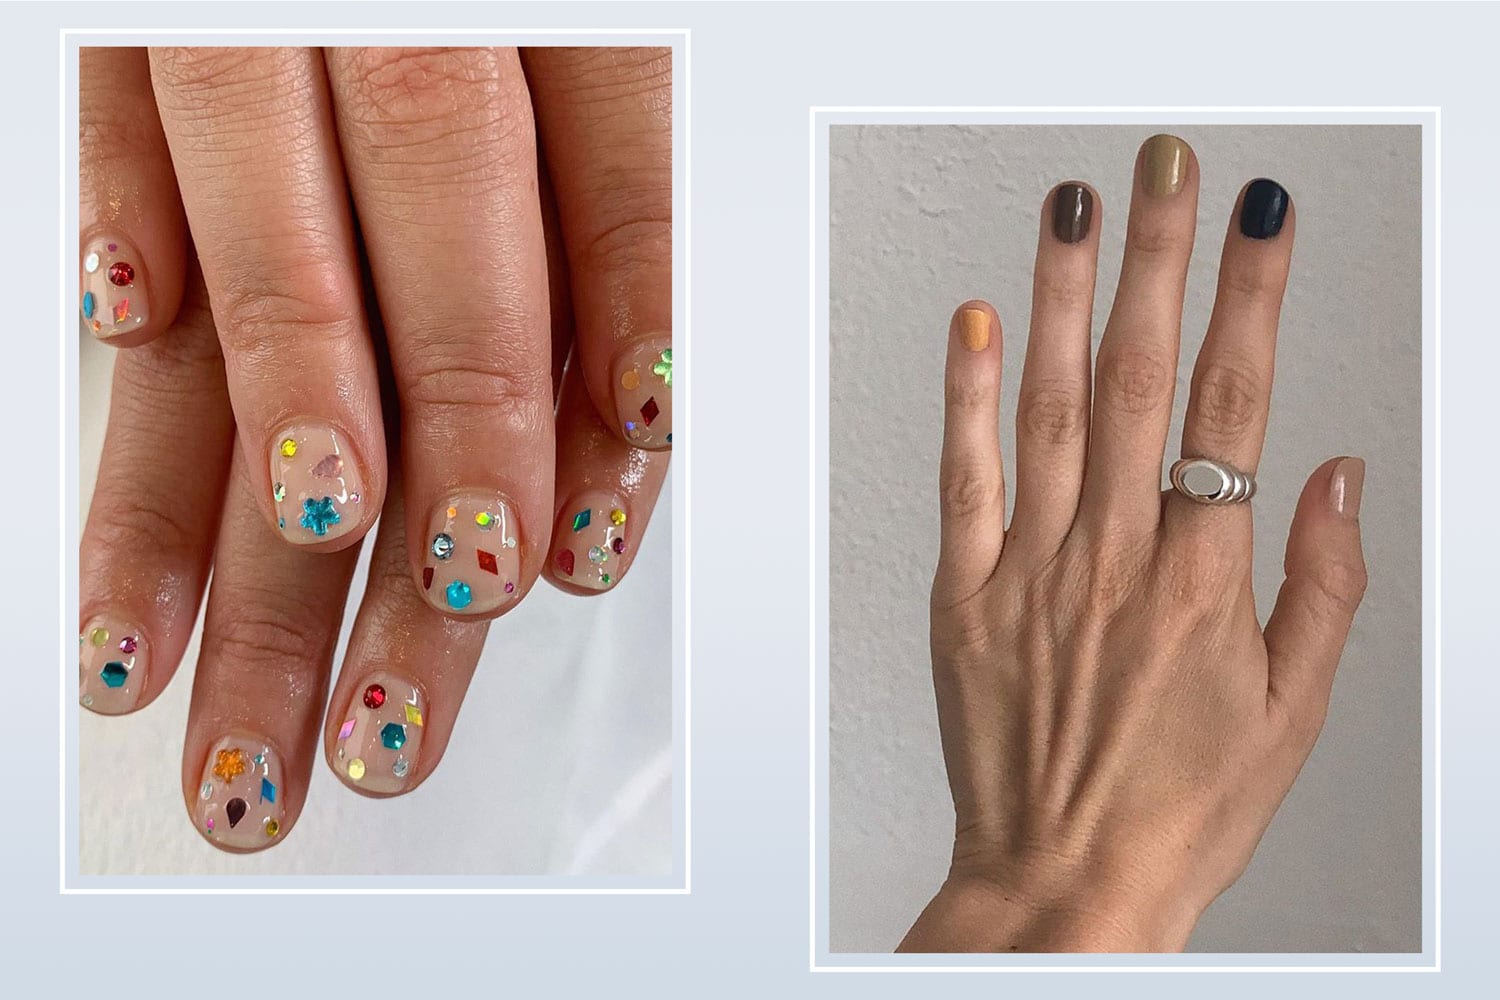 A side by side of two hands with nail art.